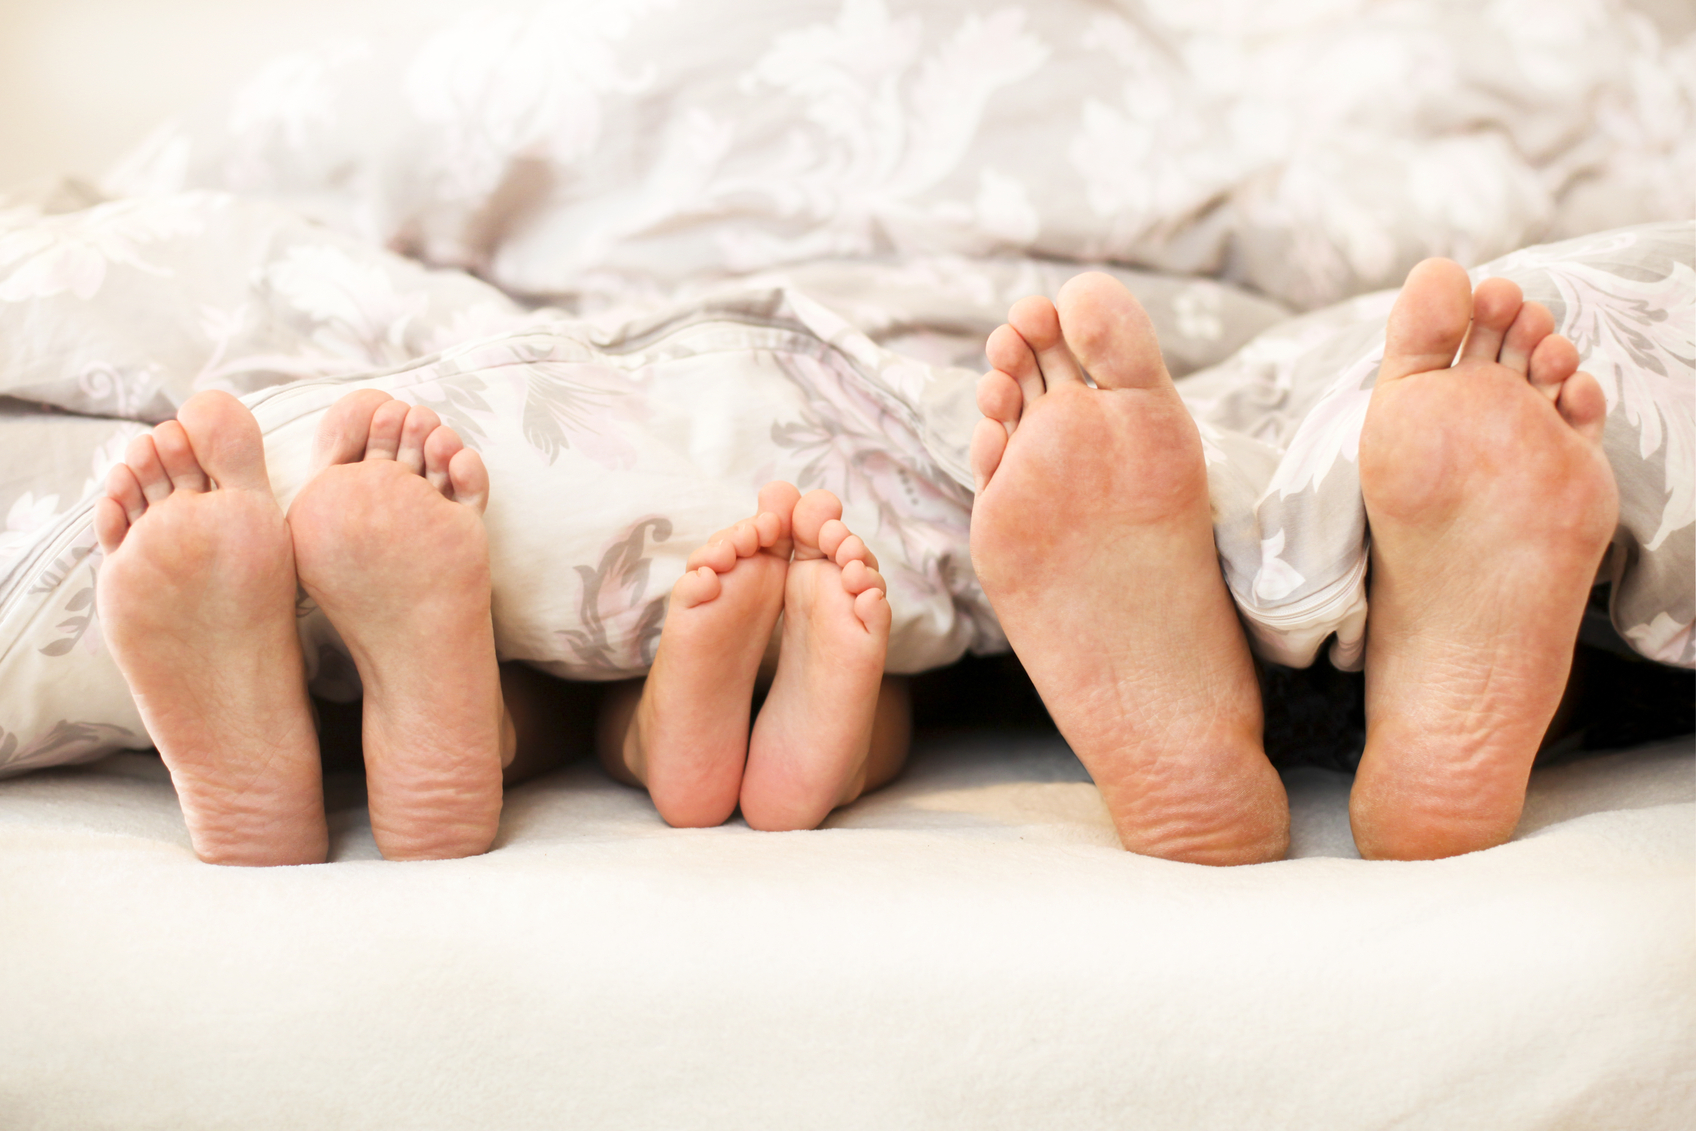 Three pairs of feet - two parent family with one child in bed under blanket. Caucasian people, unrecognizable.